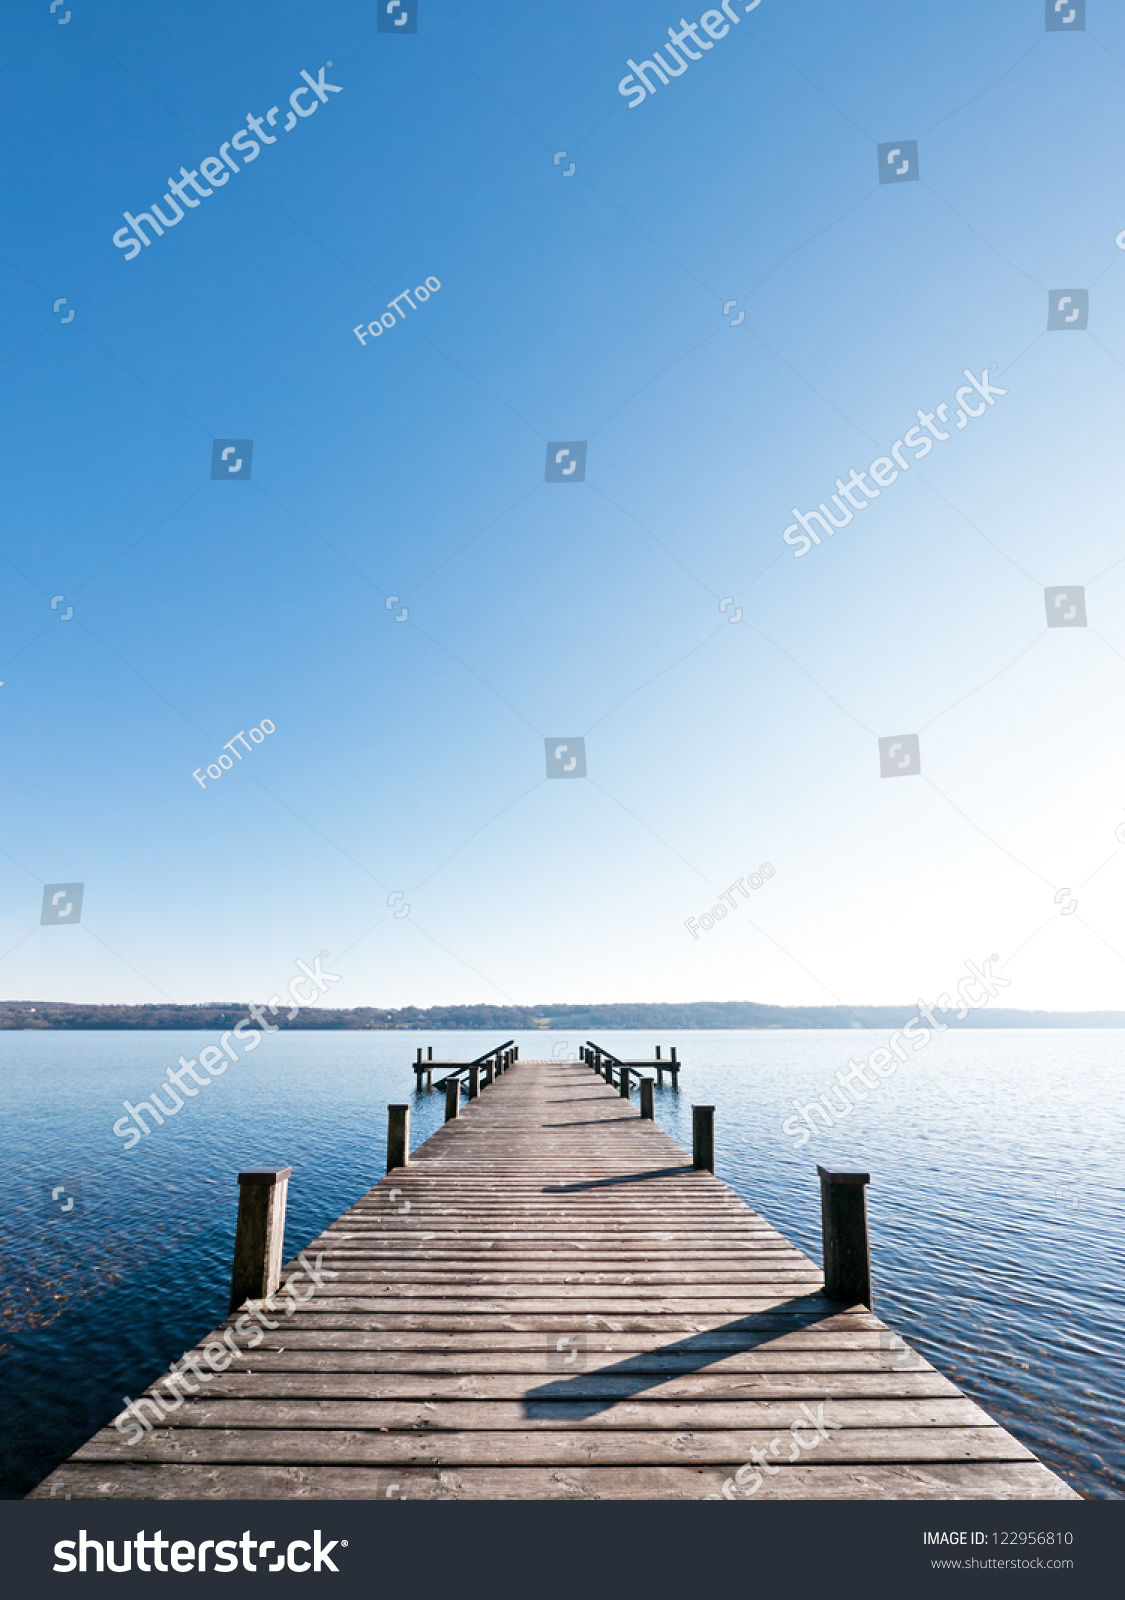 old wooden jetty at a lake #122956810